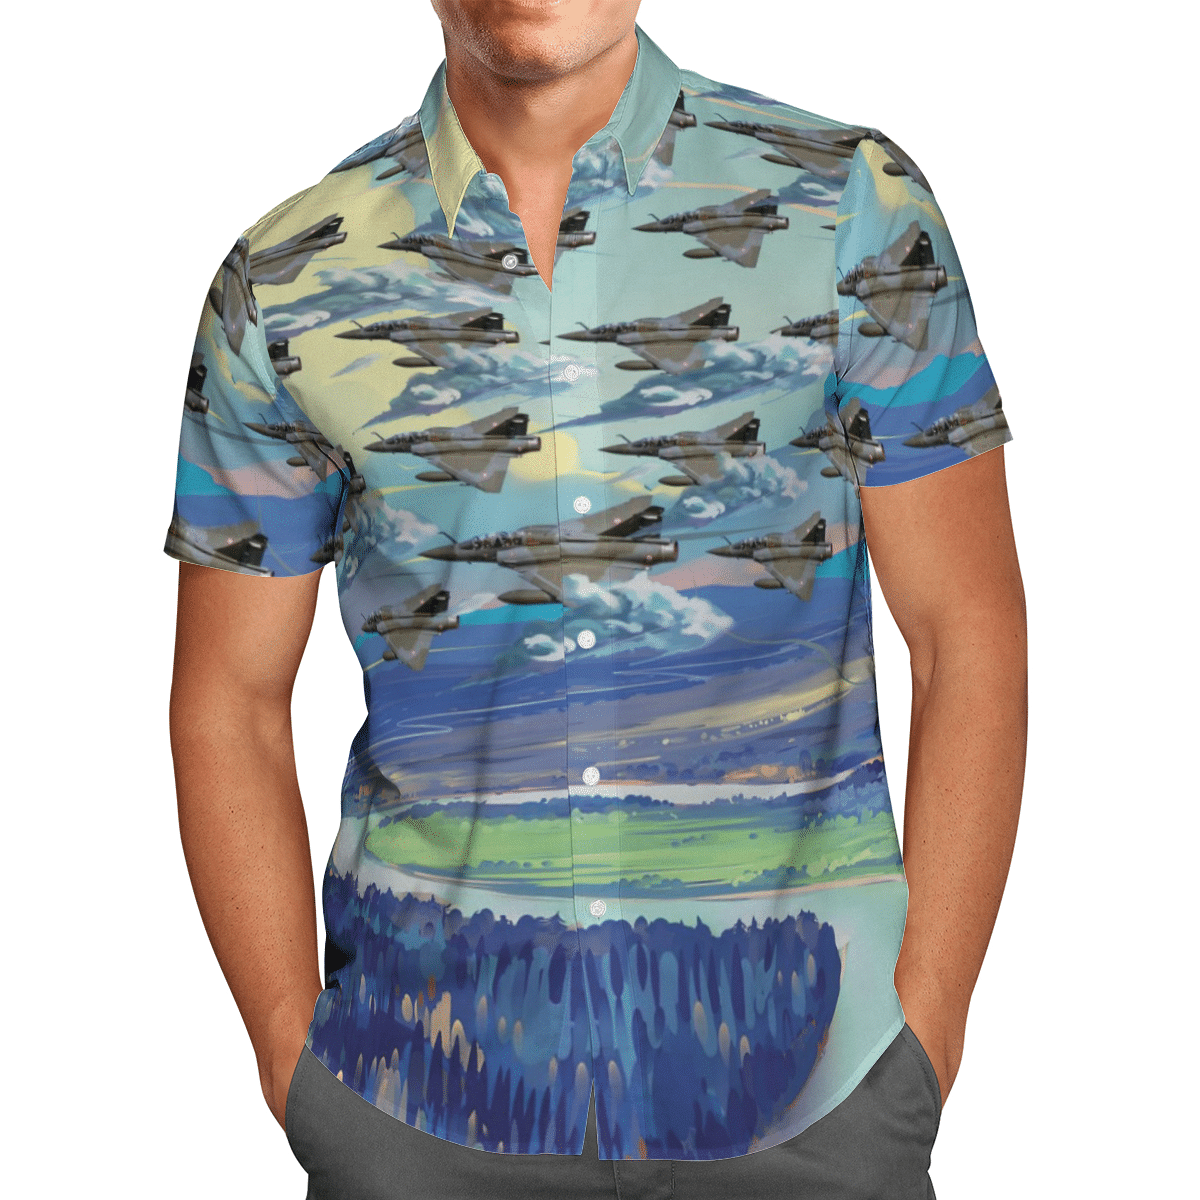 HOT Mirage 2000D French Air and Space Force Beach Short, Hawaii Shirt1